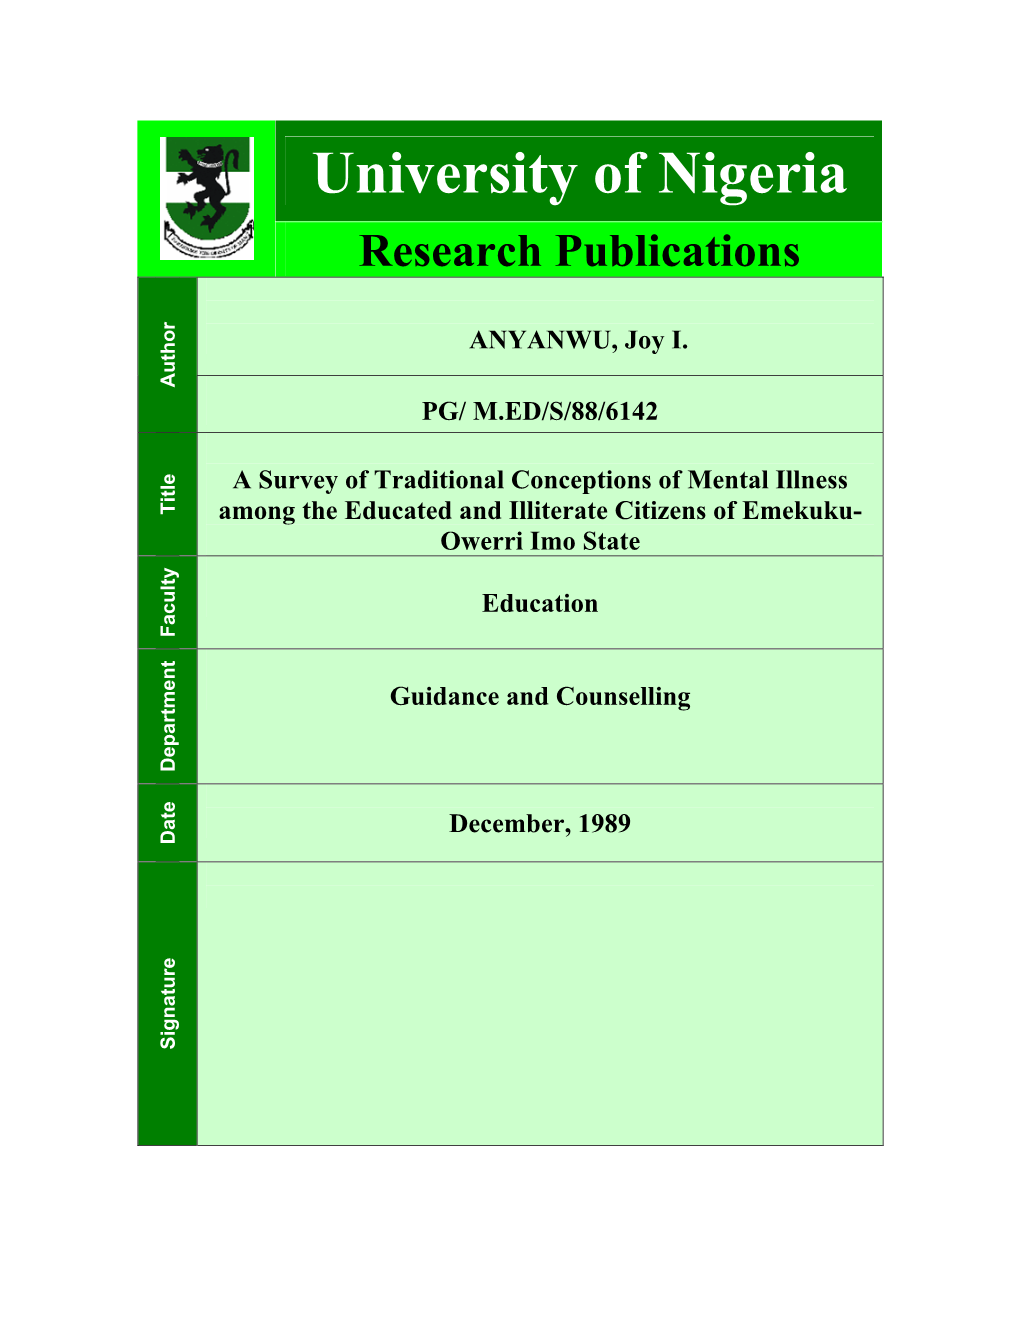 A Survey of Traditional Conceptions of Mental Illness Among the Educated and Illiterate Citizens of Emekuku